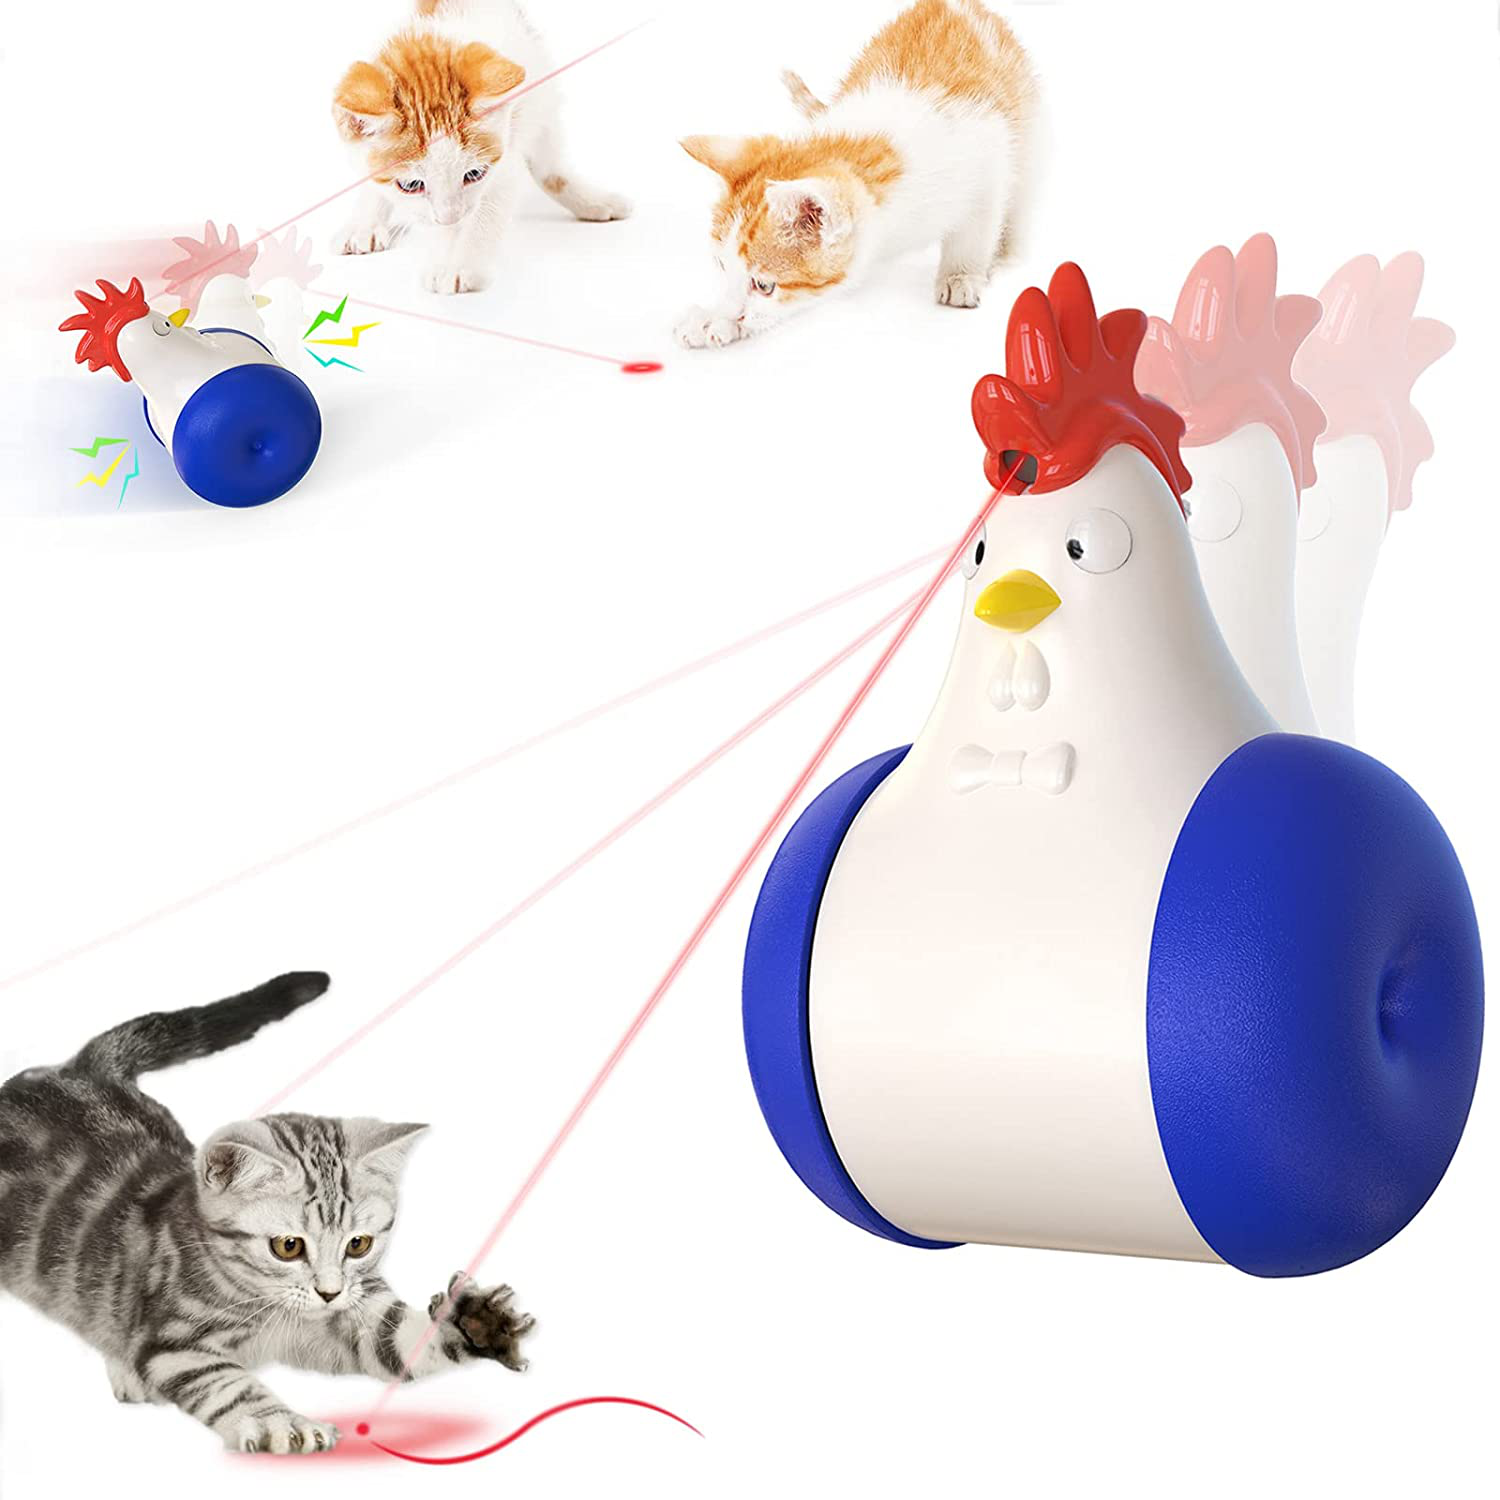 Cat Toys, Cat Laser Toys, Funny Cat Toys, Indoor Cat Toys, Balance Car Cat Toys, Kitten Toys, Cat Training Toys, Interactive Cat Toys, Squeaky Toys, Chicken Squawk Toys. Animals & Pet Supplies > Pet Supplies > Cat Supplies > Cat Toys zhenmao Laser cat and mouse toys  